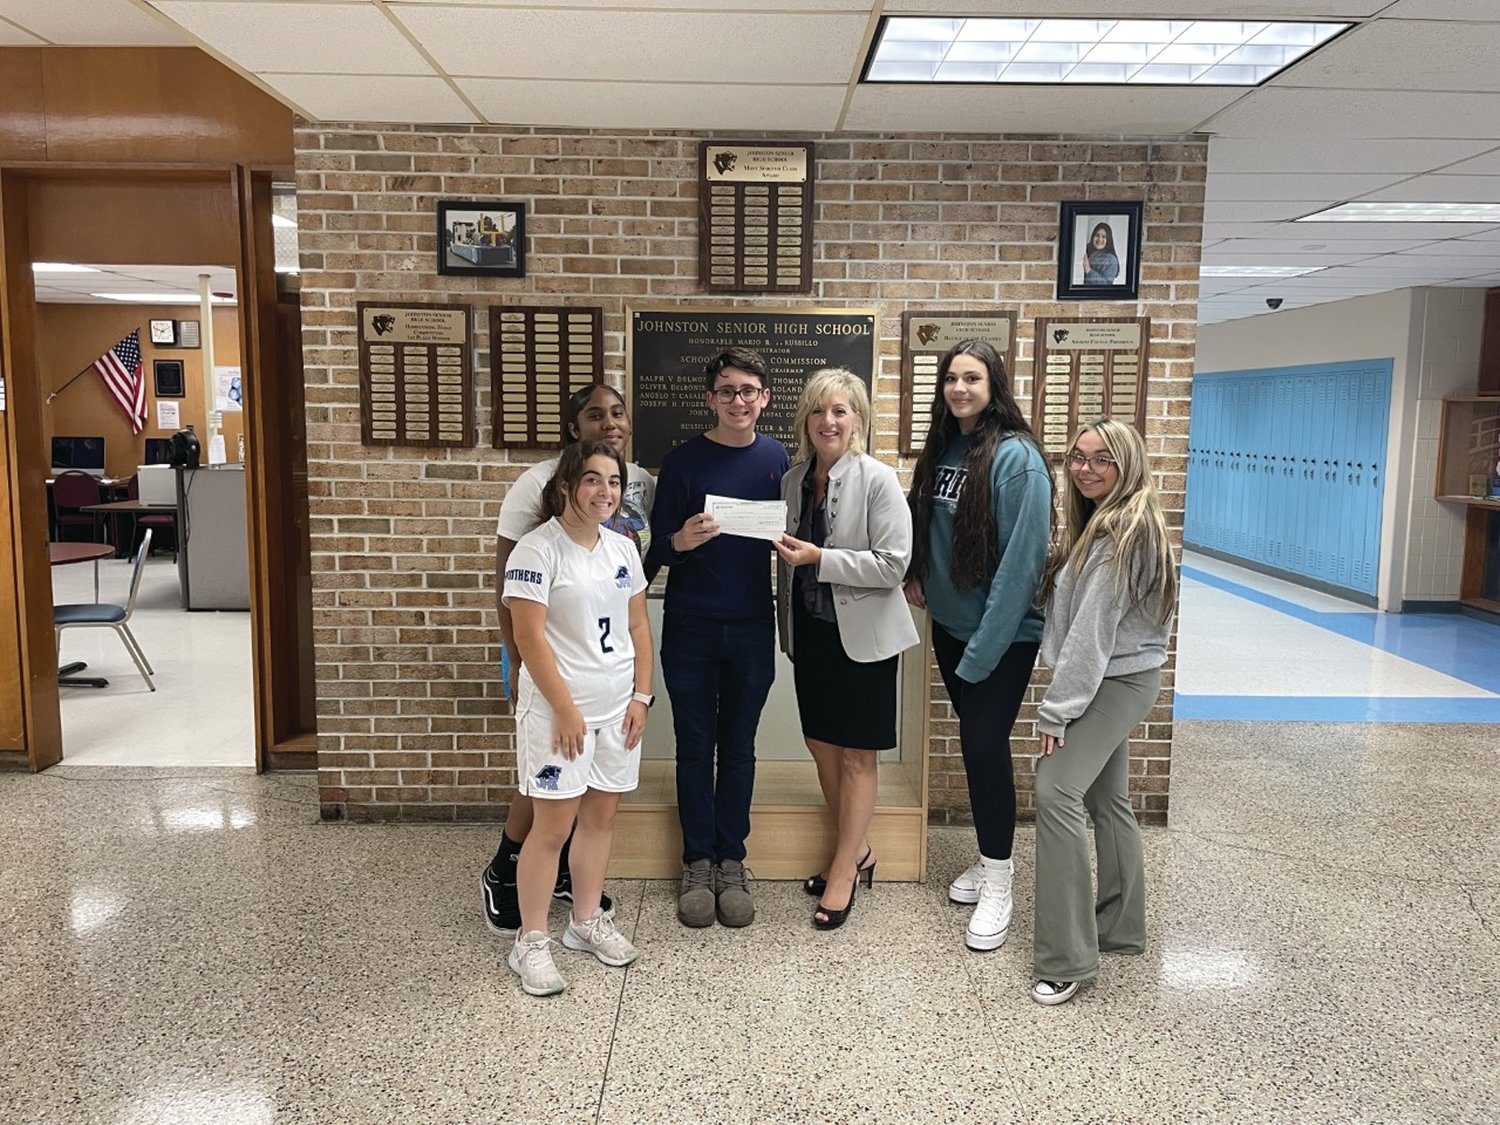 GENEROUS GIFT: Lisa Abbenante, Executive of The Tomorrow Fund that’s based at Hasbro Children’s Hospital, accepts a $945 check from JHS Student Council President Charles Curci that will be used to help families whose children are battling cancer. Also taking part were Josephine Olagundoye, Alessandra Presare and Lucas Anderson.